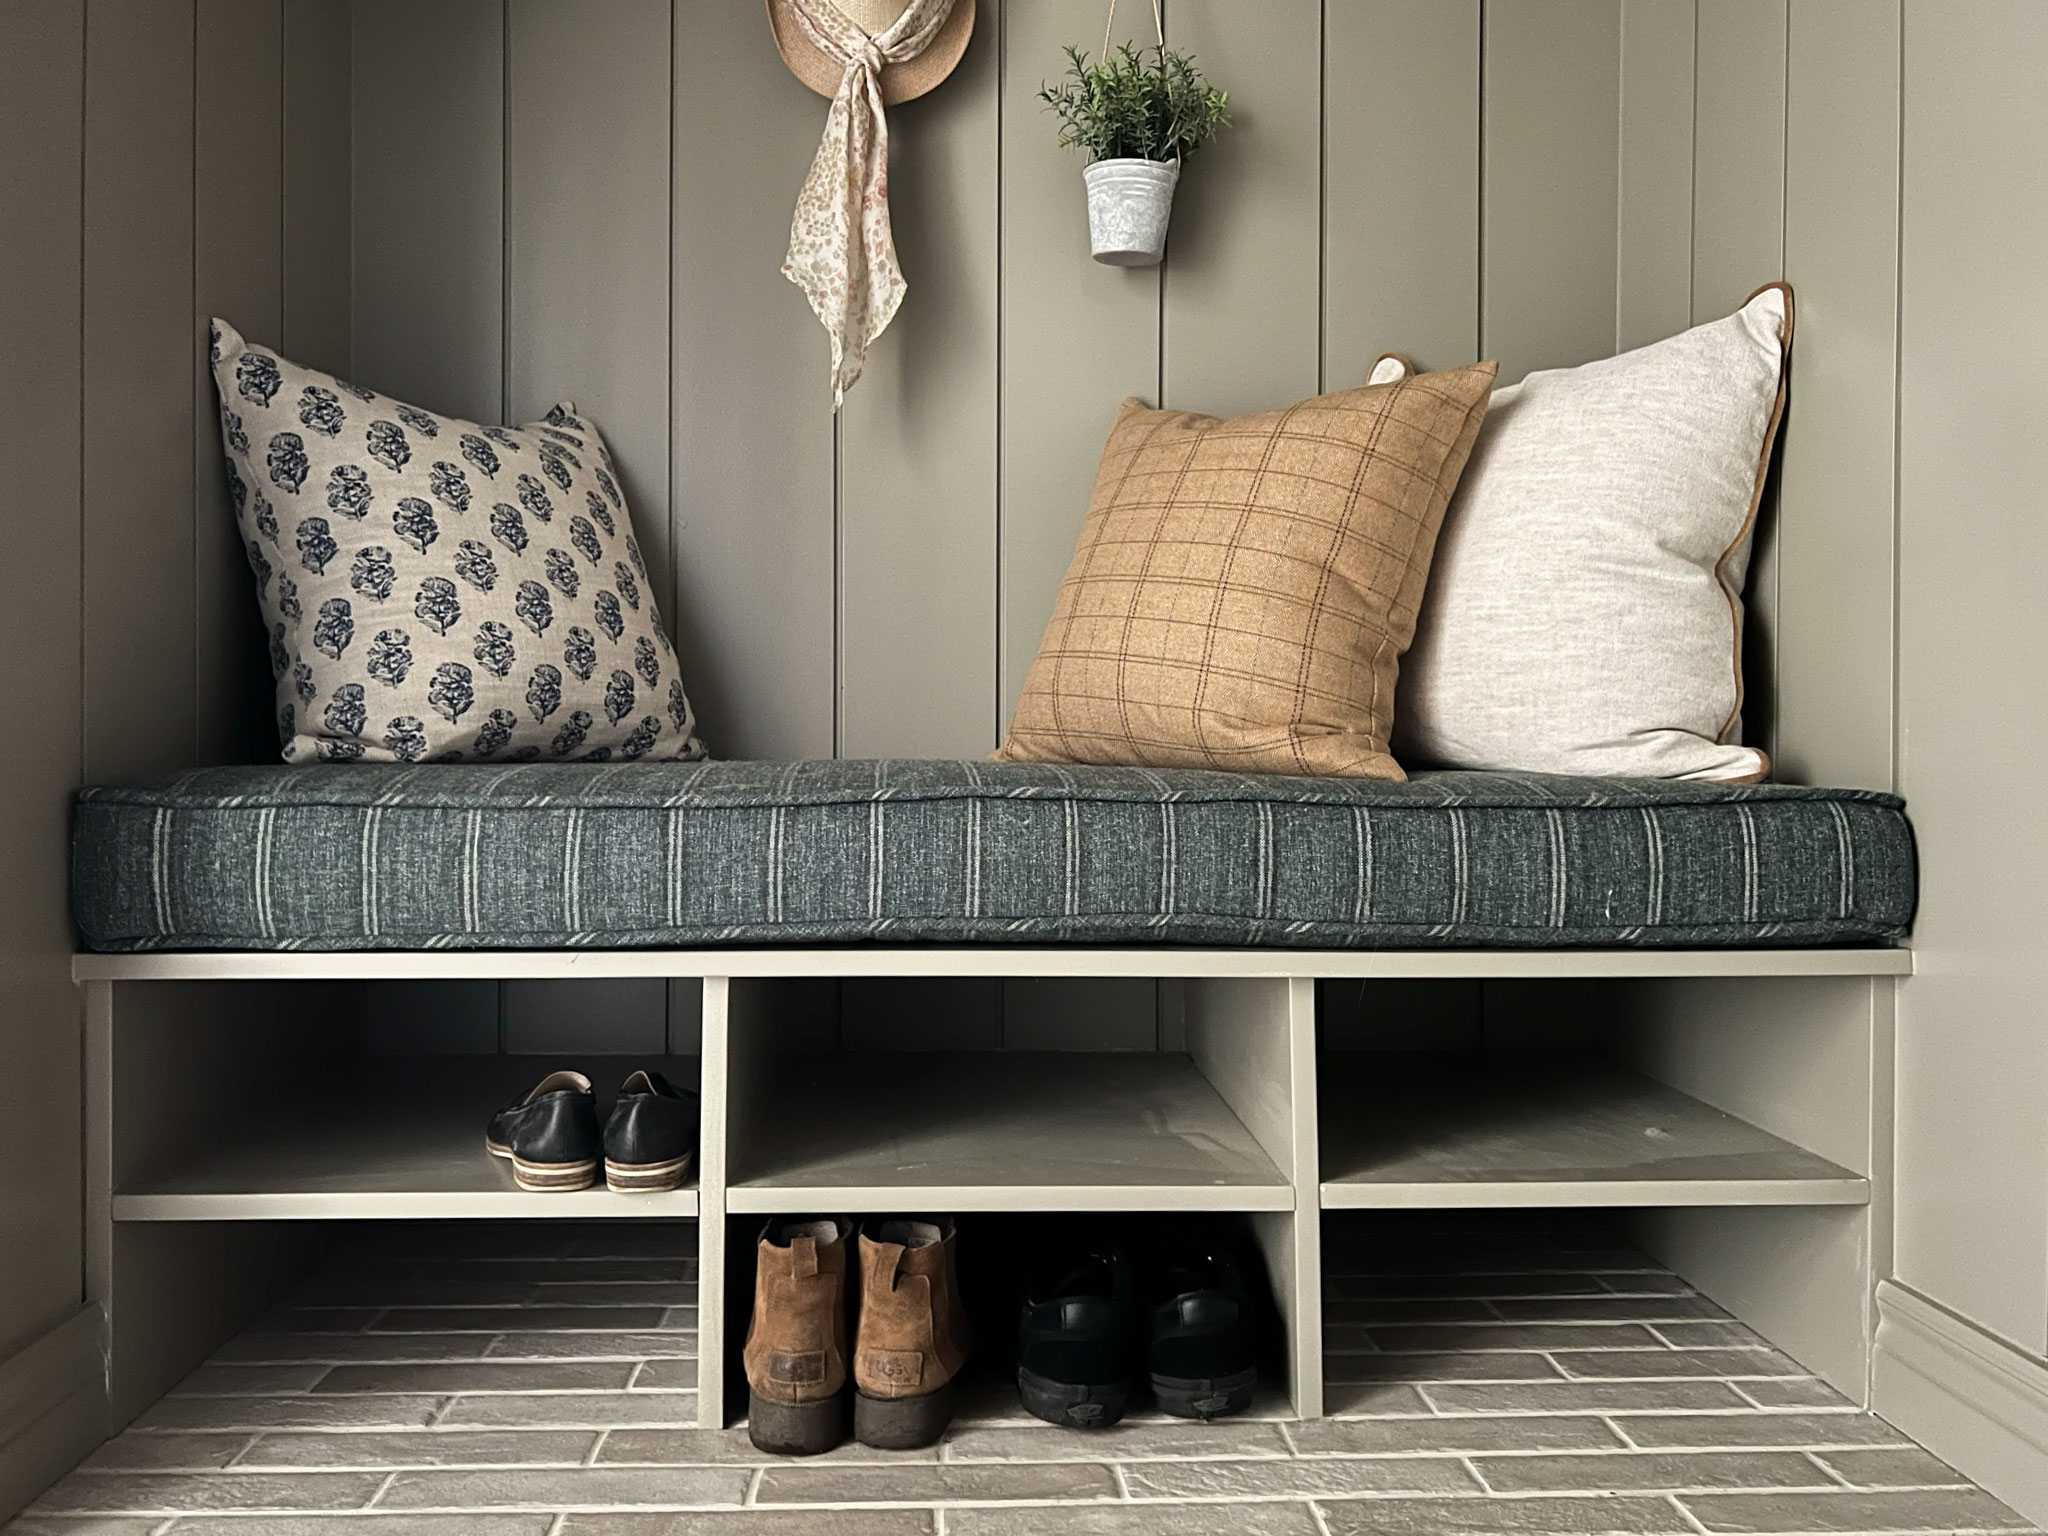 bench seat with shoe shelves below with navy stirped cushion and three pillows